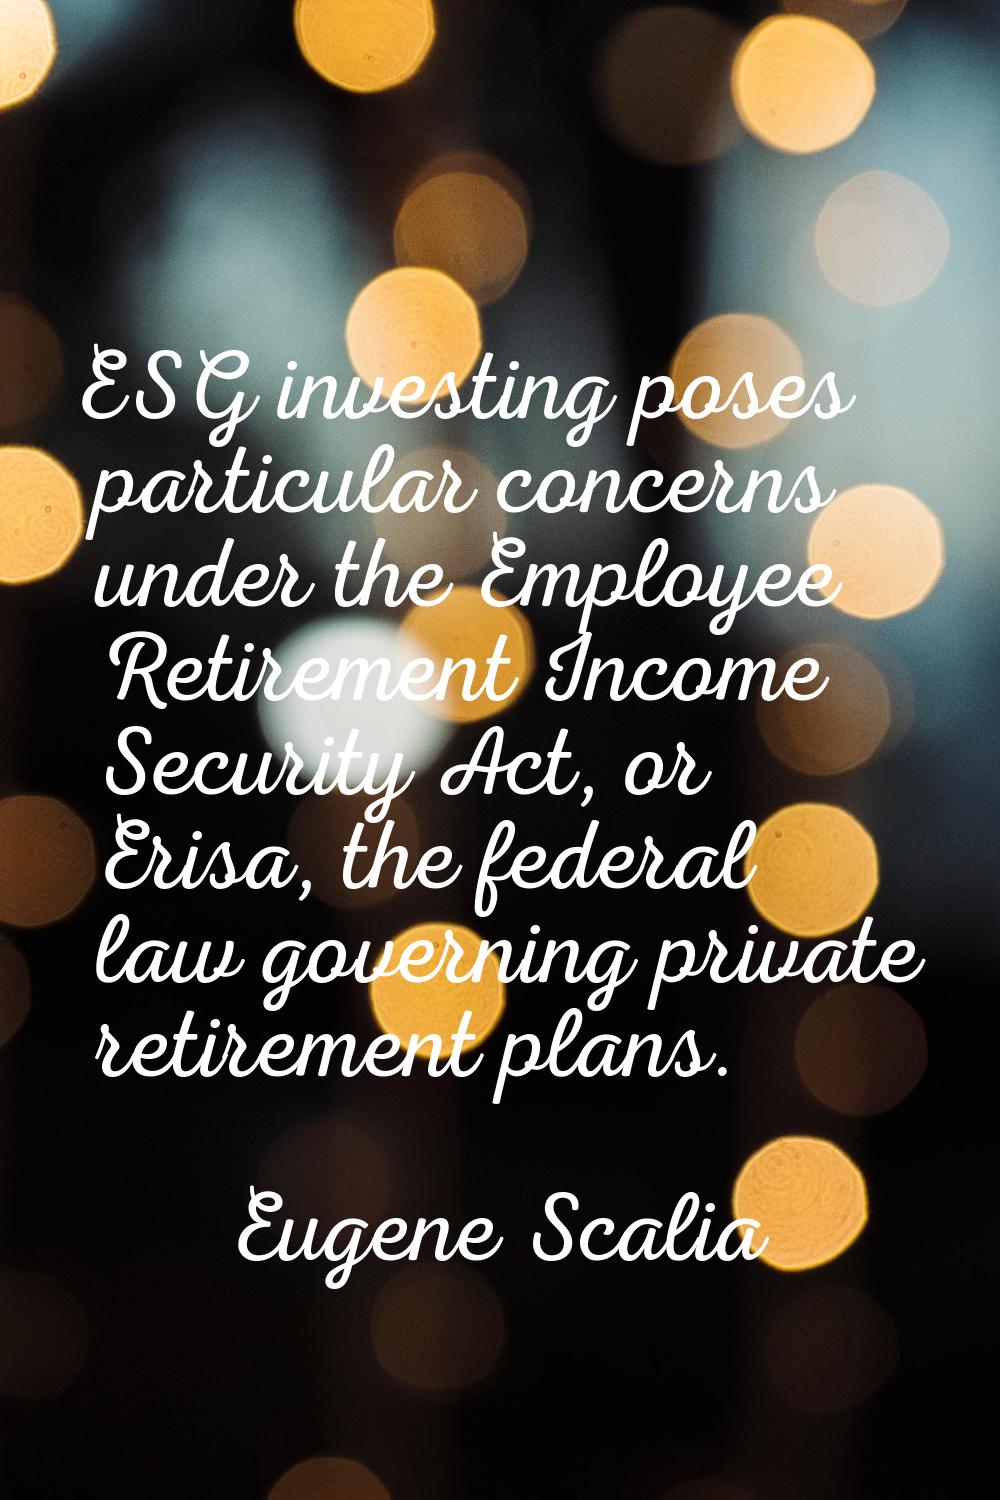 ESG investing poses particular concerns under the Employee Retirement Income Security Act, or Erisa